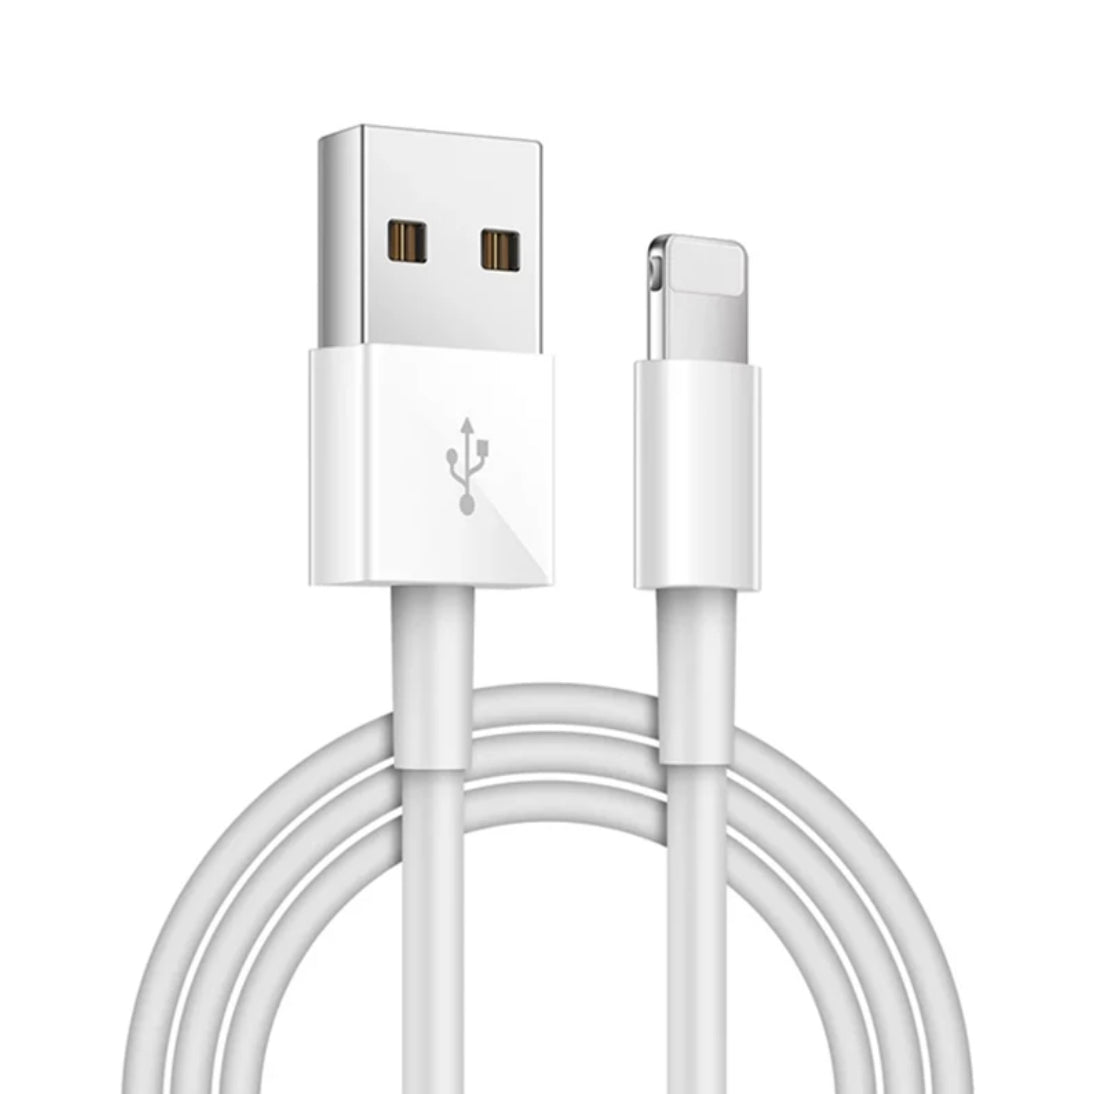 2m Lightning USB charging cable **Buy 1 Get 1**